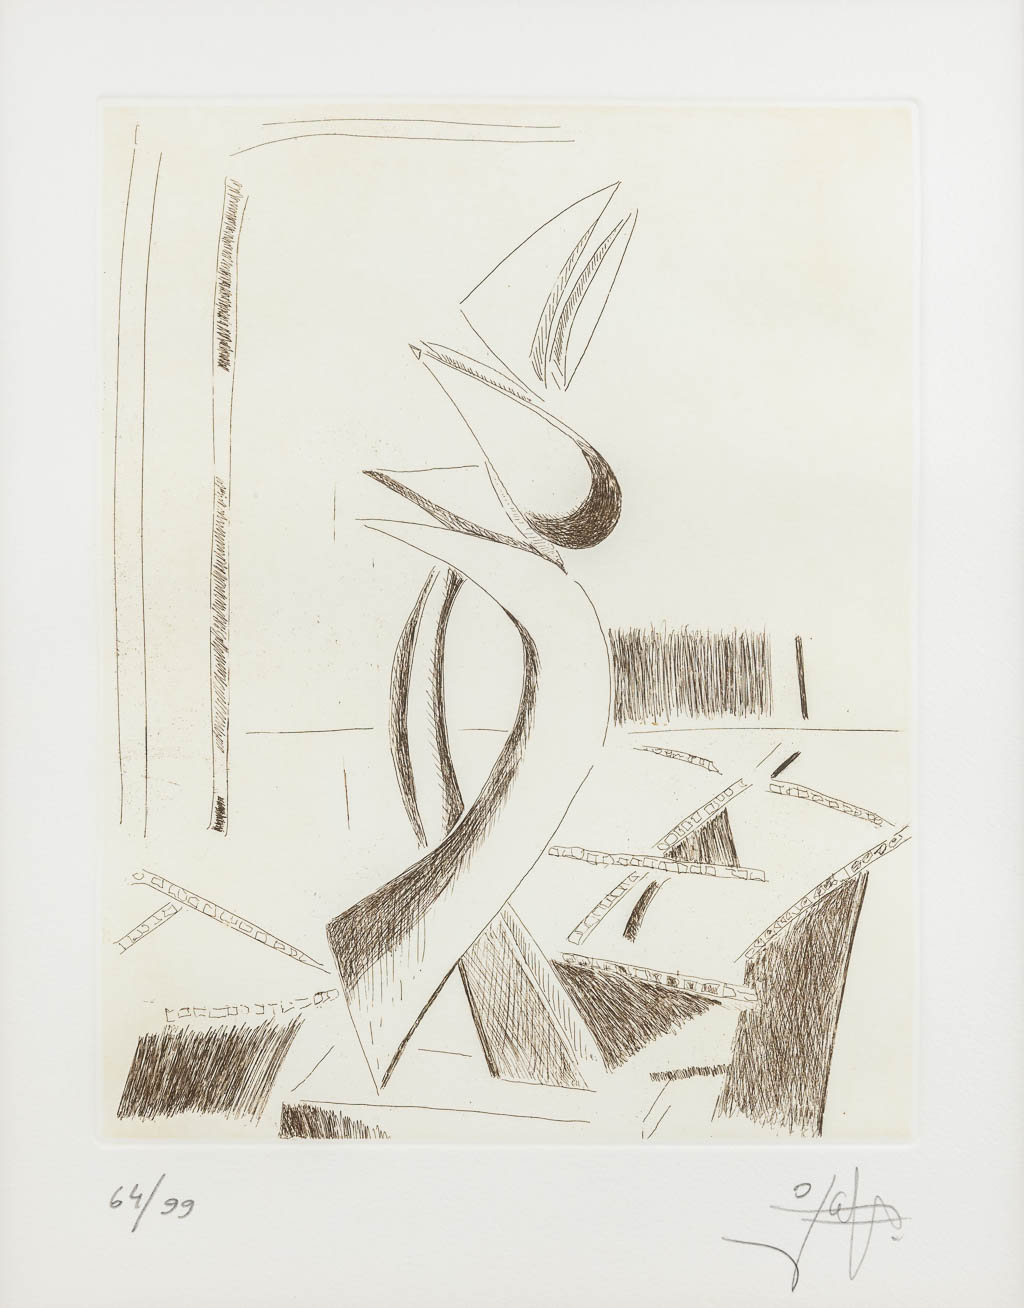 Pablo ATCHUGARRY (1954) 'Designs for a sculpture' Two lithographs. (W:26 x H:33 cm) - Image 4 of 15